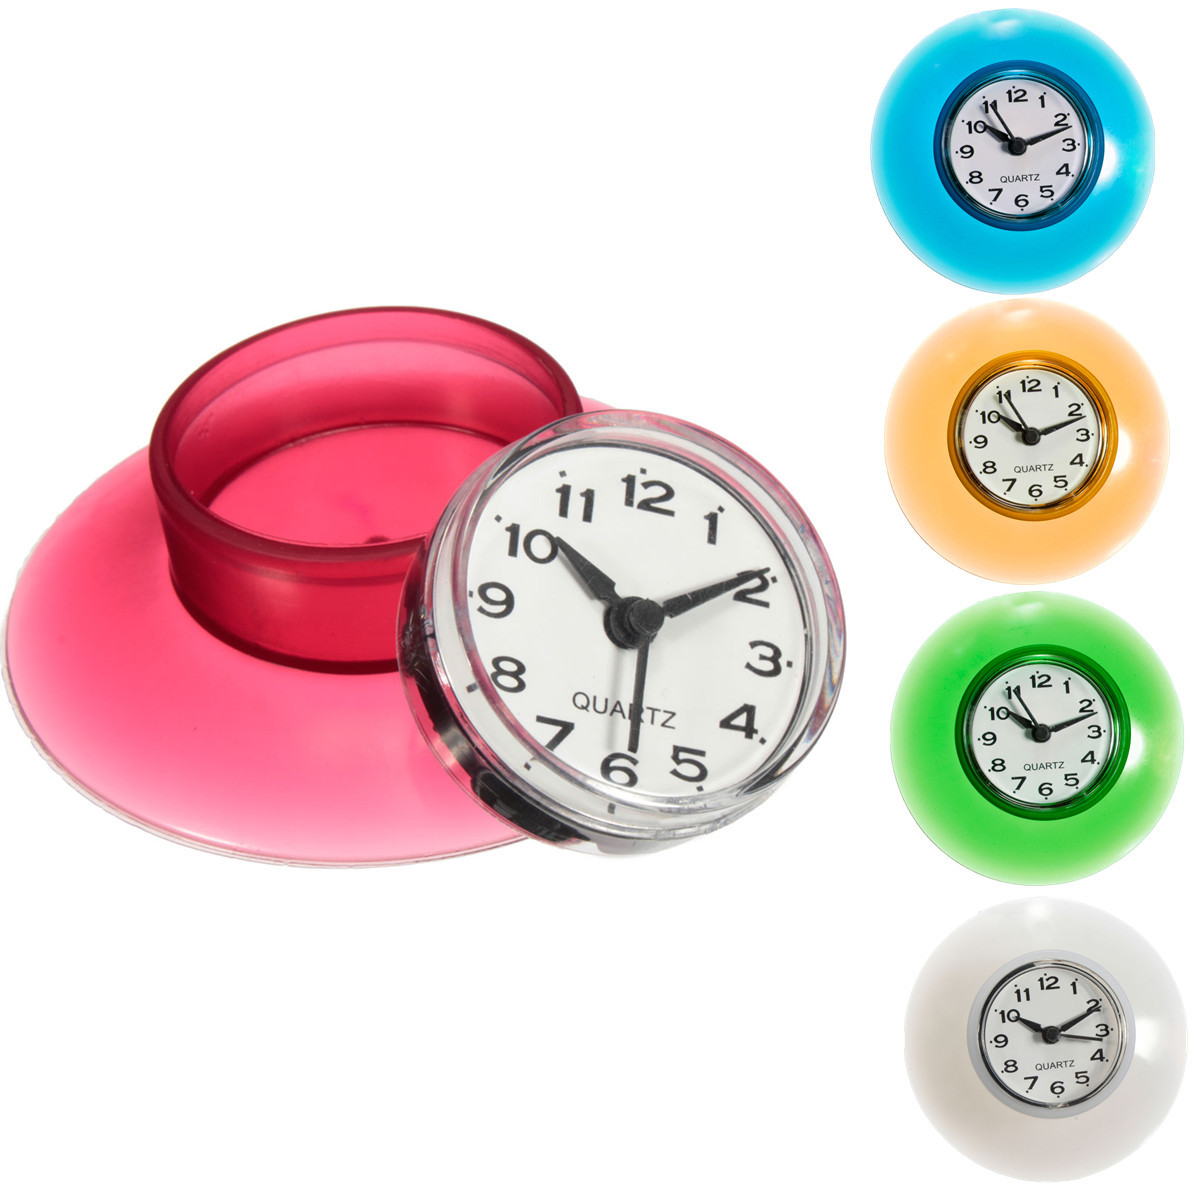 Bathroom Kitchen Waterproof Wall Clock Resistant Timer Suction Cup